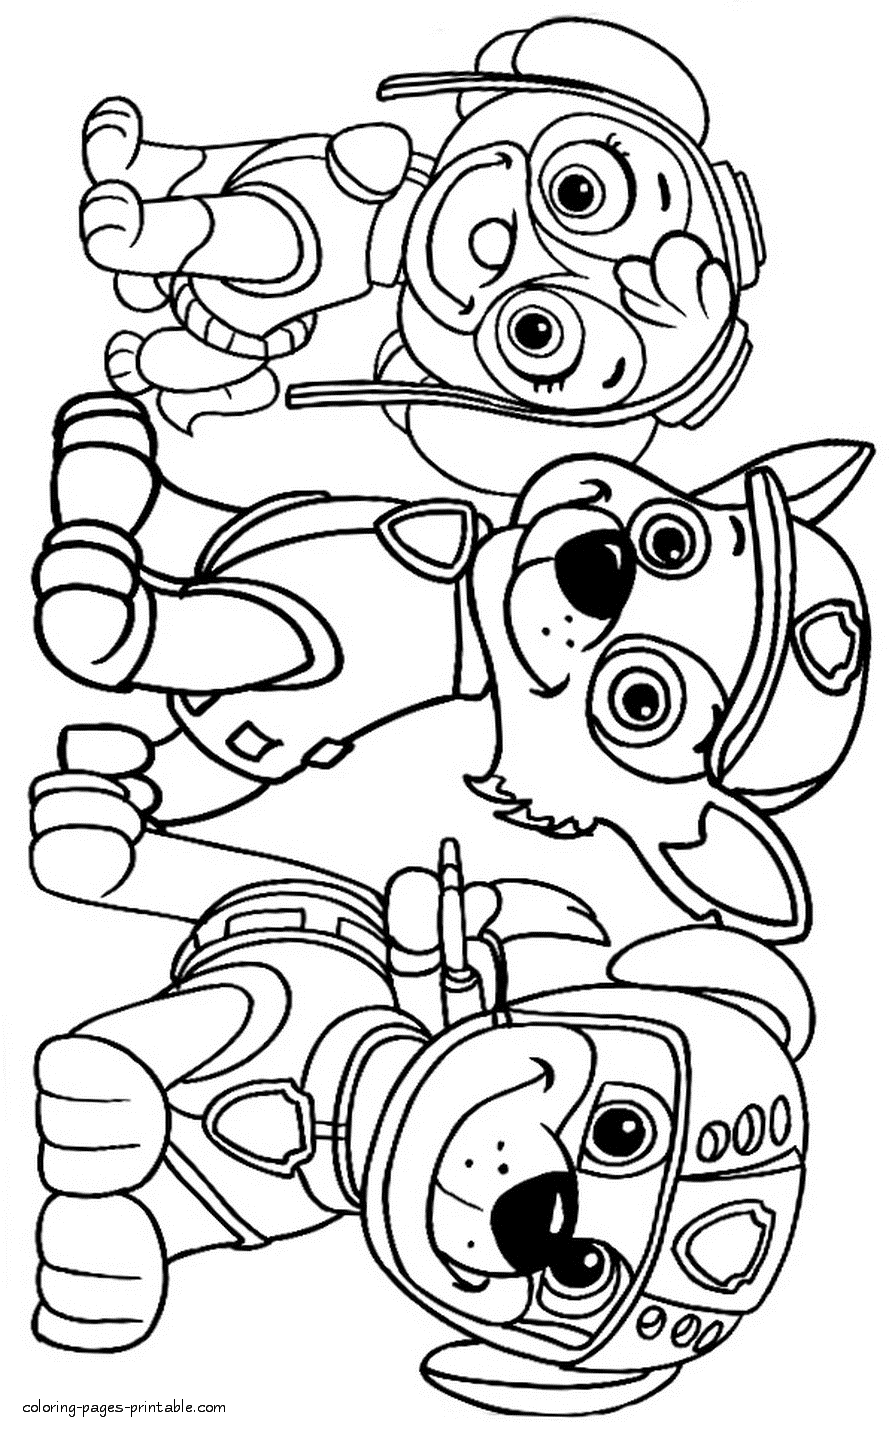 free-kids-coloring-pages-paw-patrol-coloring-pages-printable-com